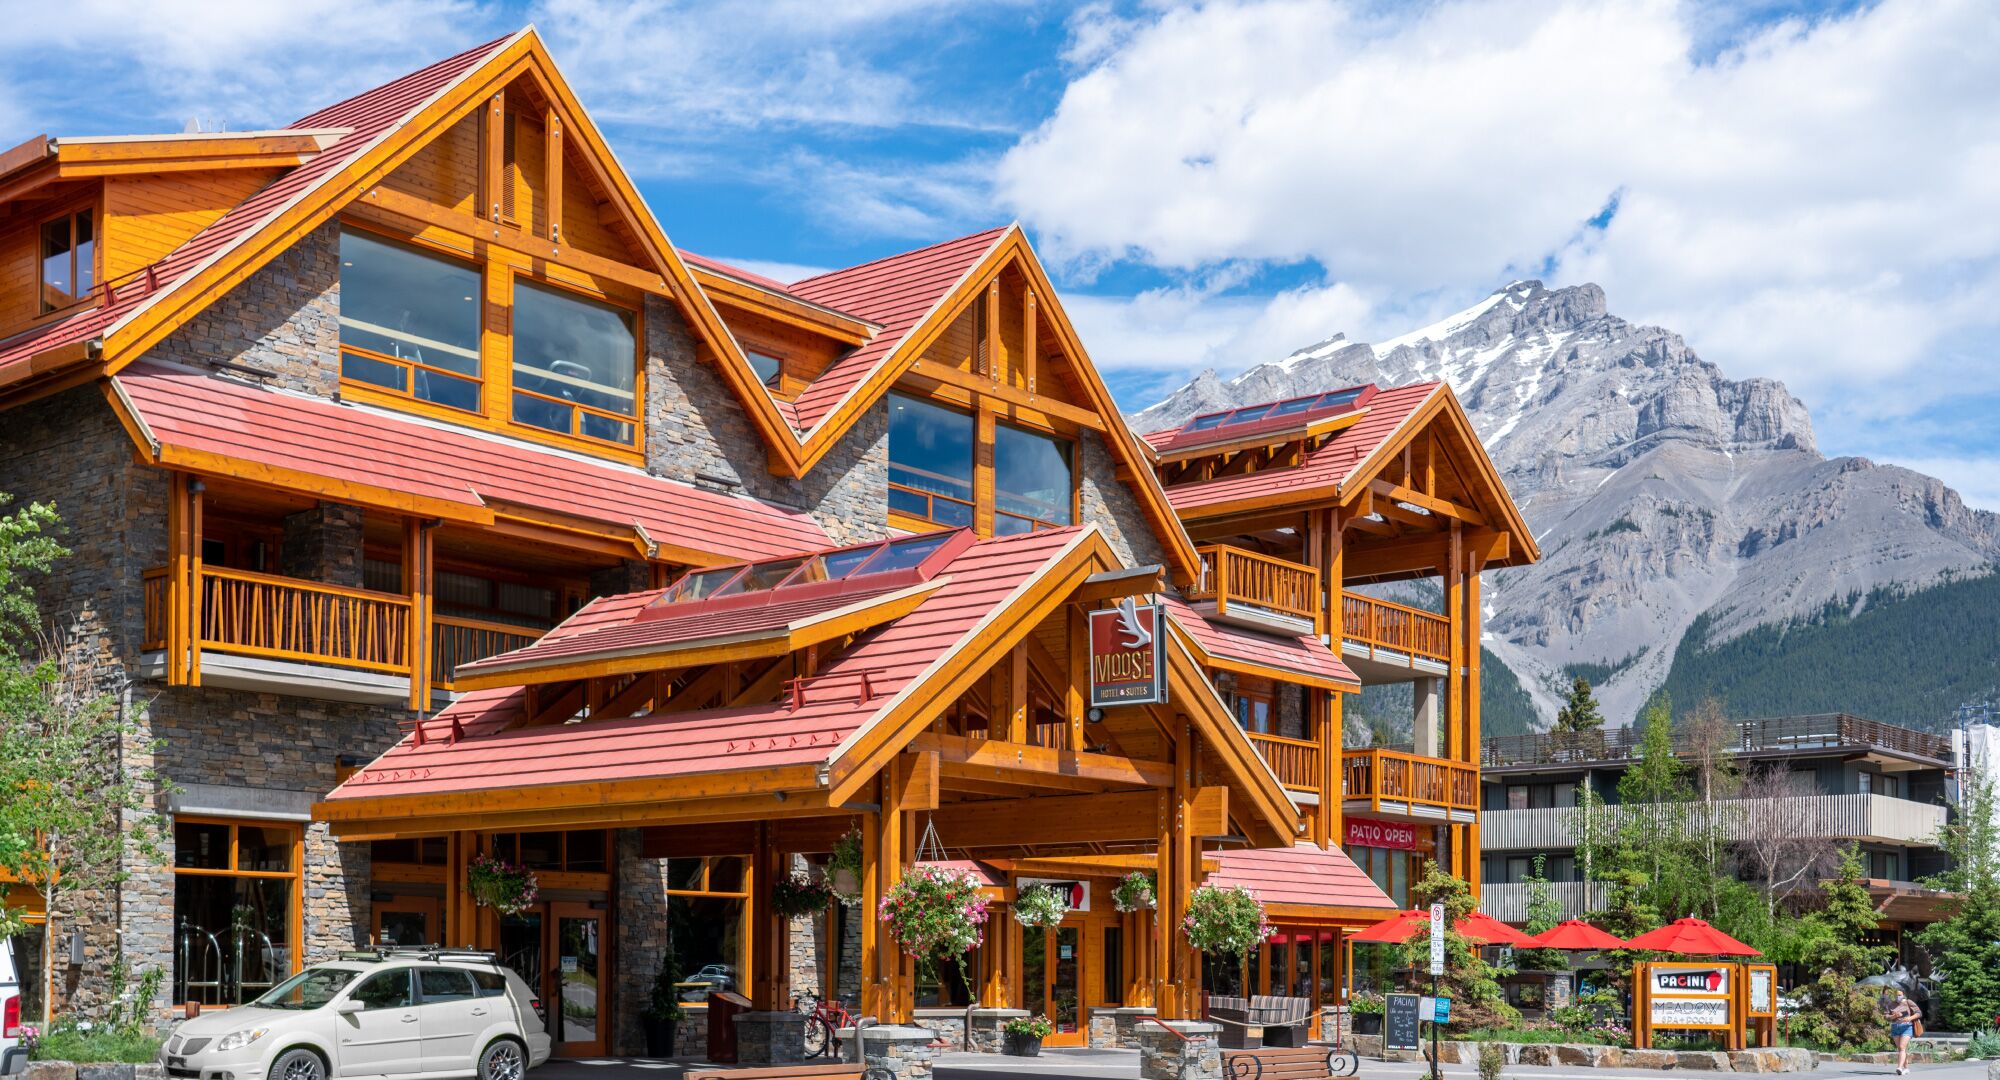 Moose Hotel in the Summer